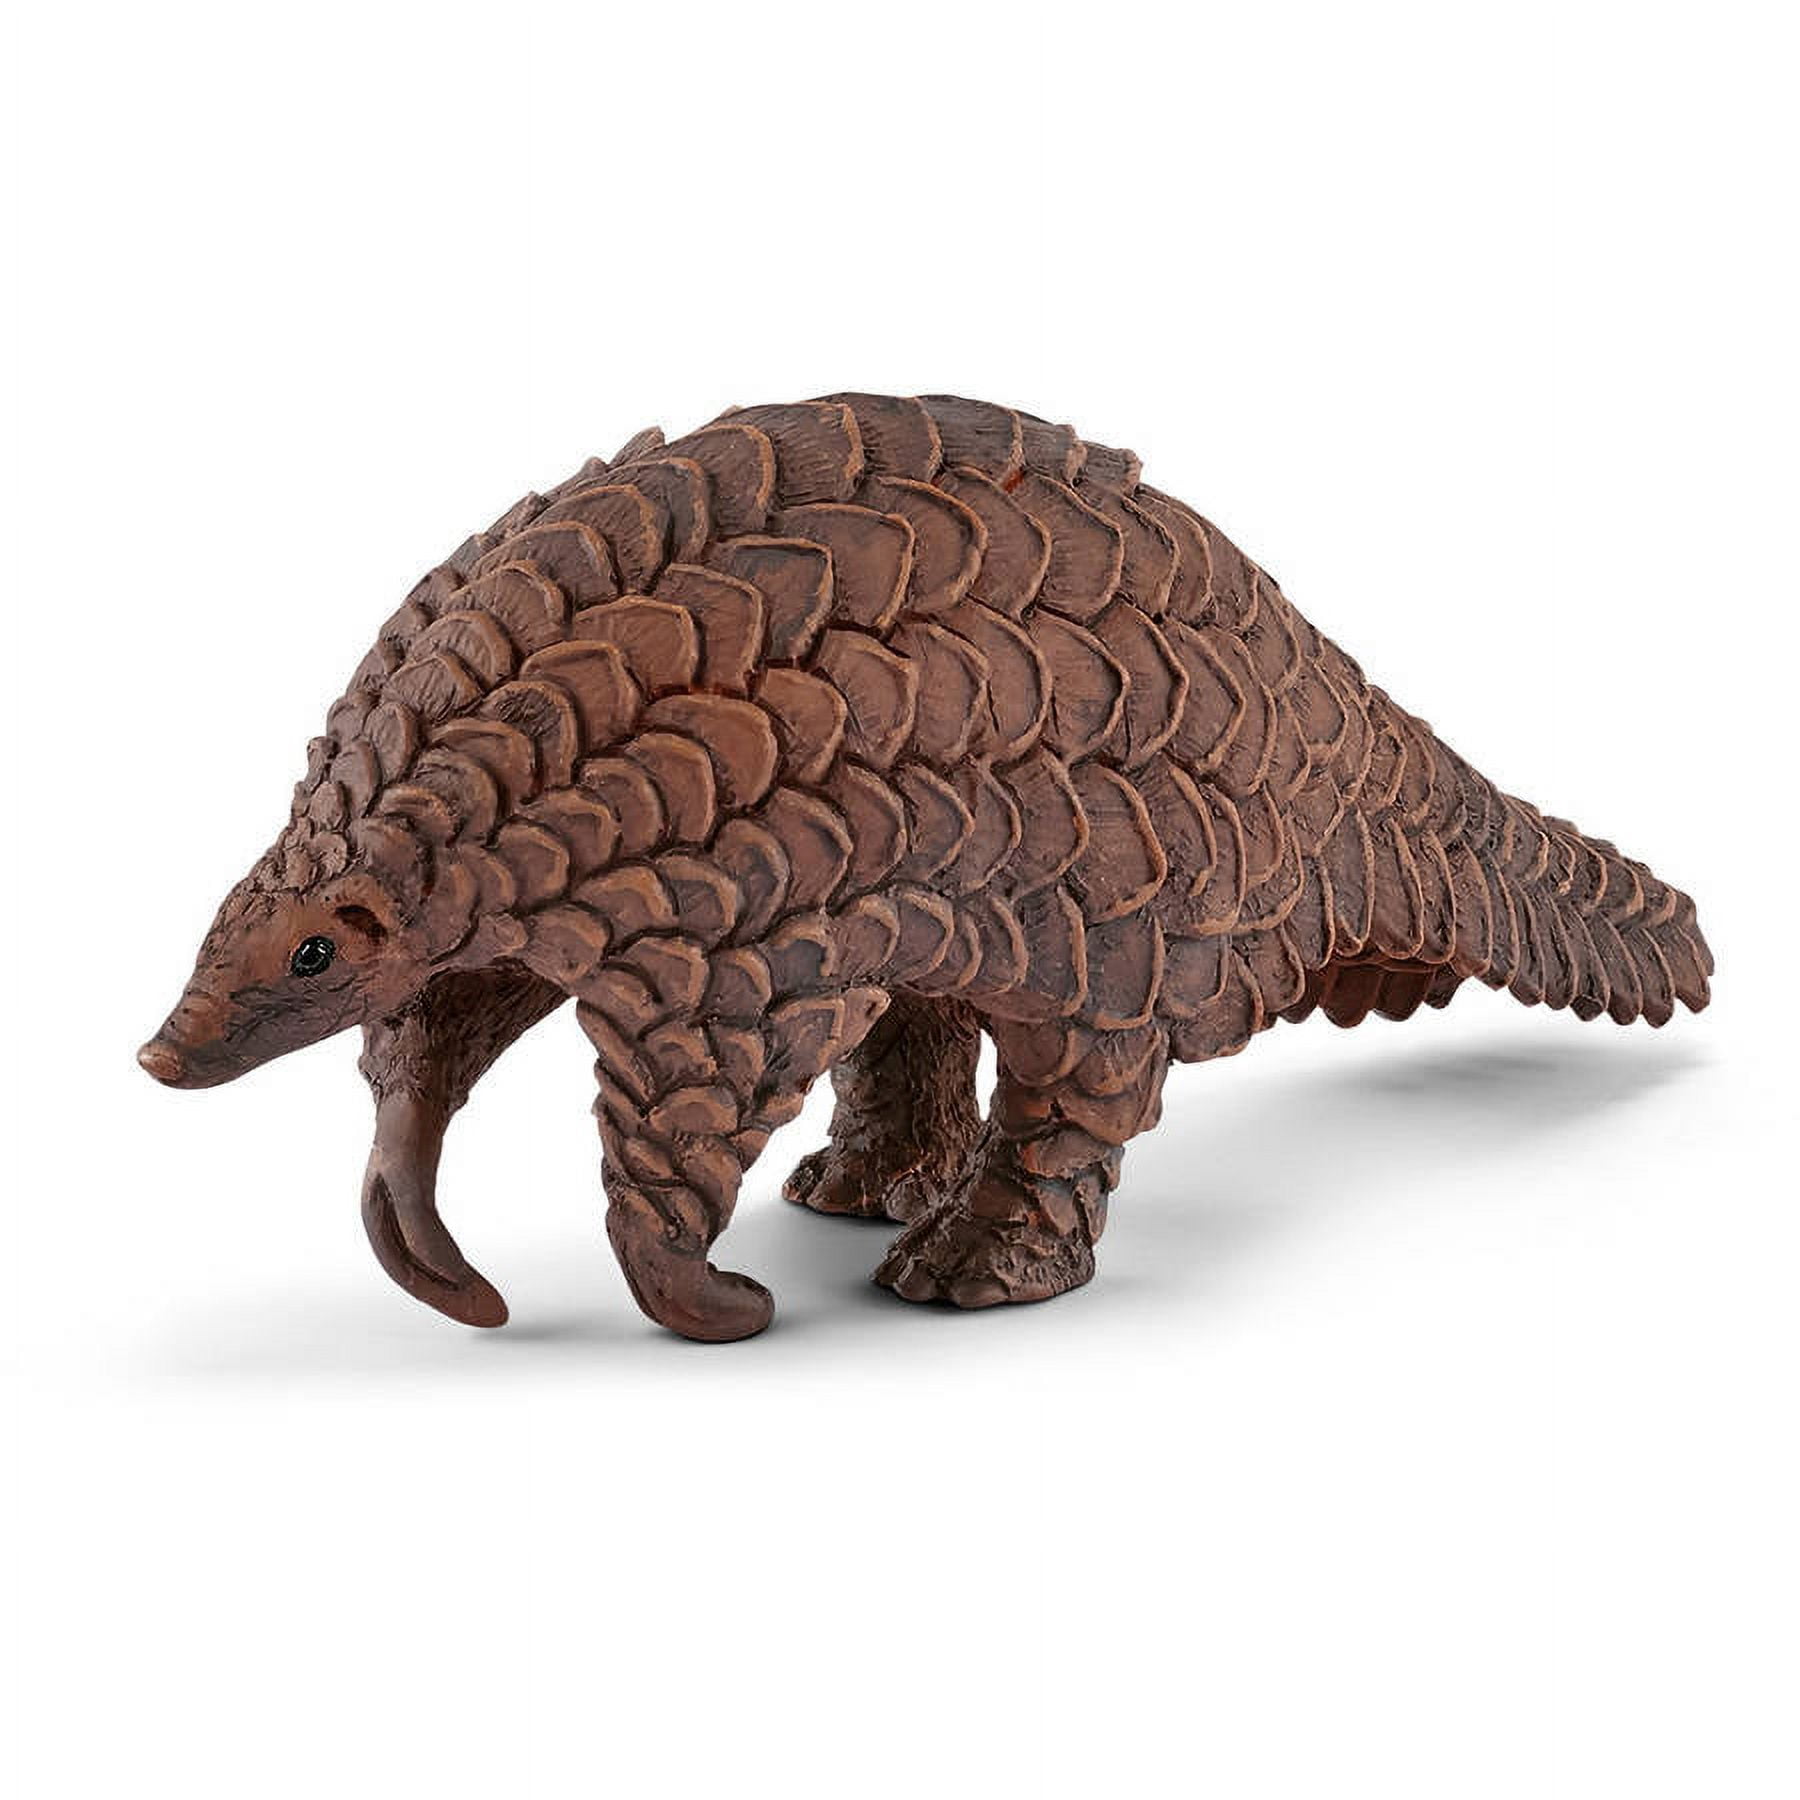 1536x2048px | free download | HD wallpaper: pangolin, walking, sand,  Animal, animal themes, animals in the wild | Wallpaper Flare